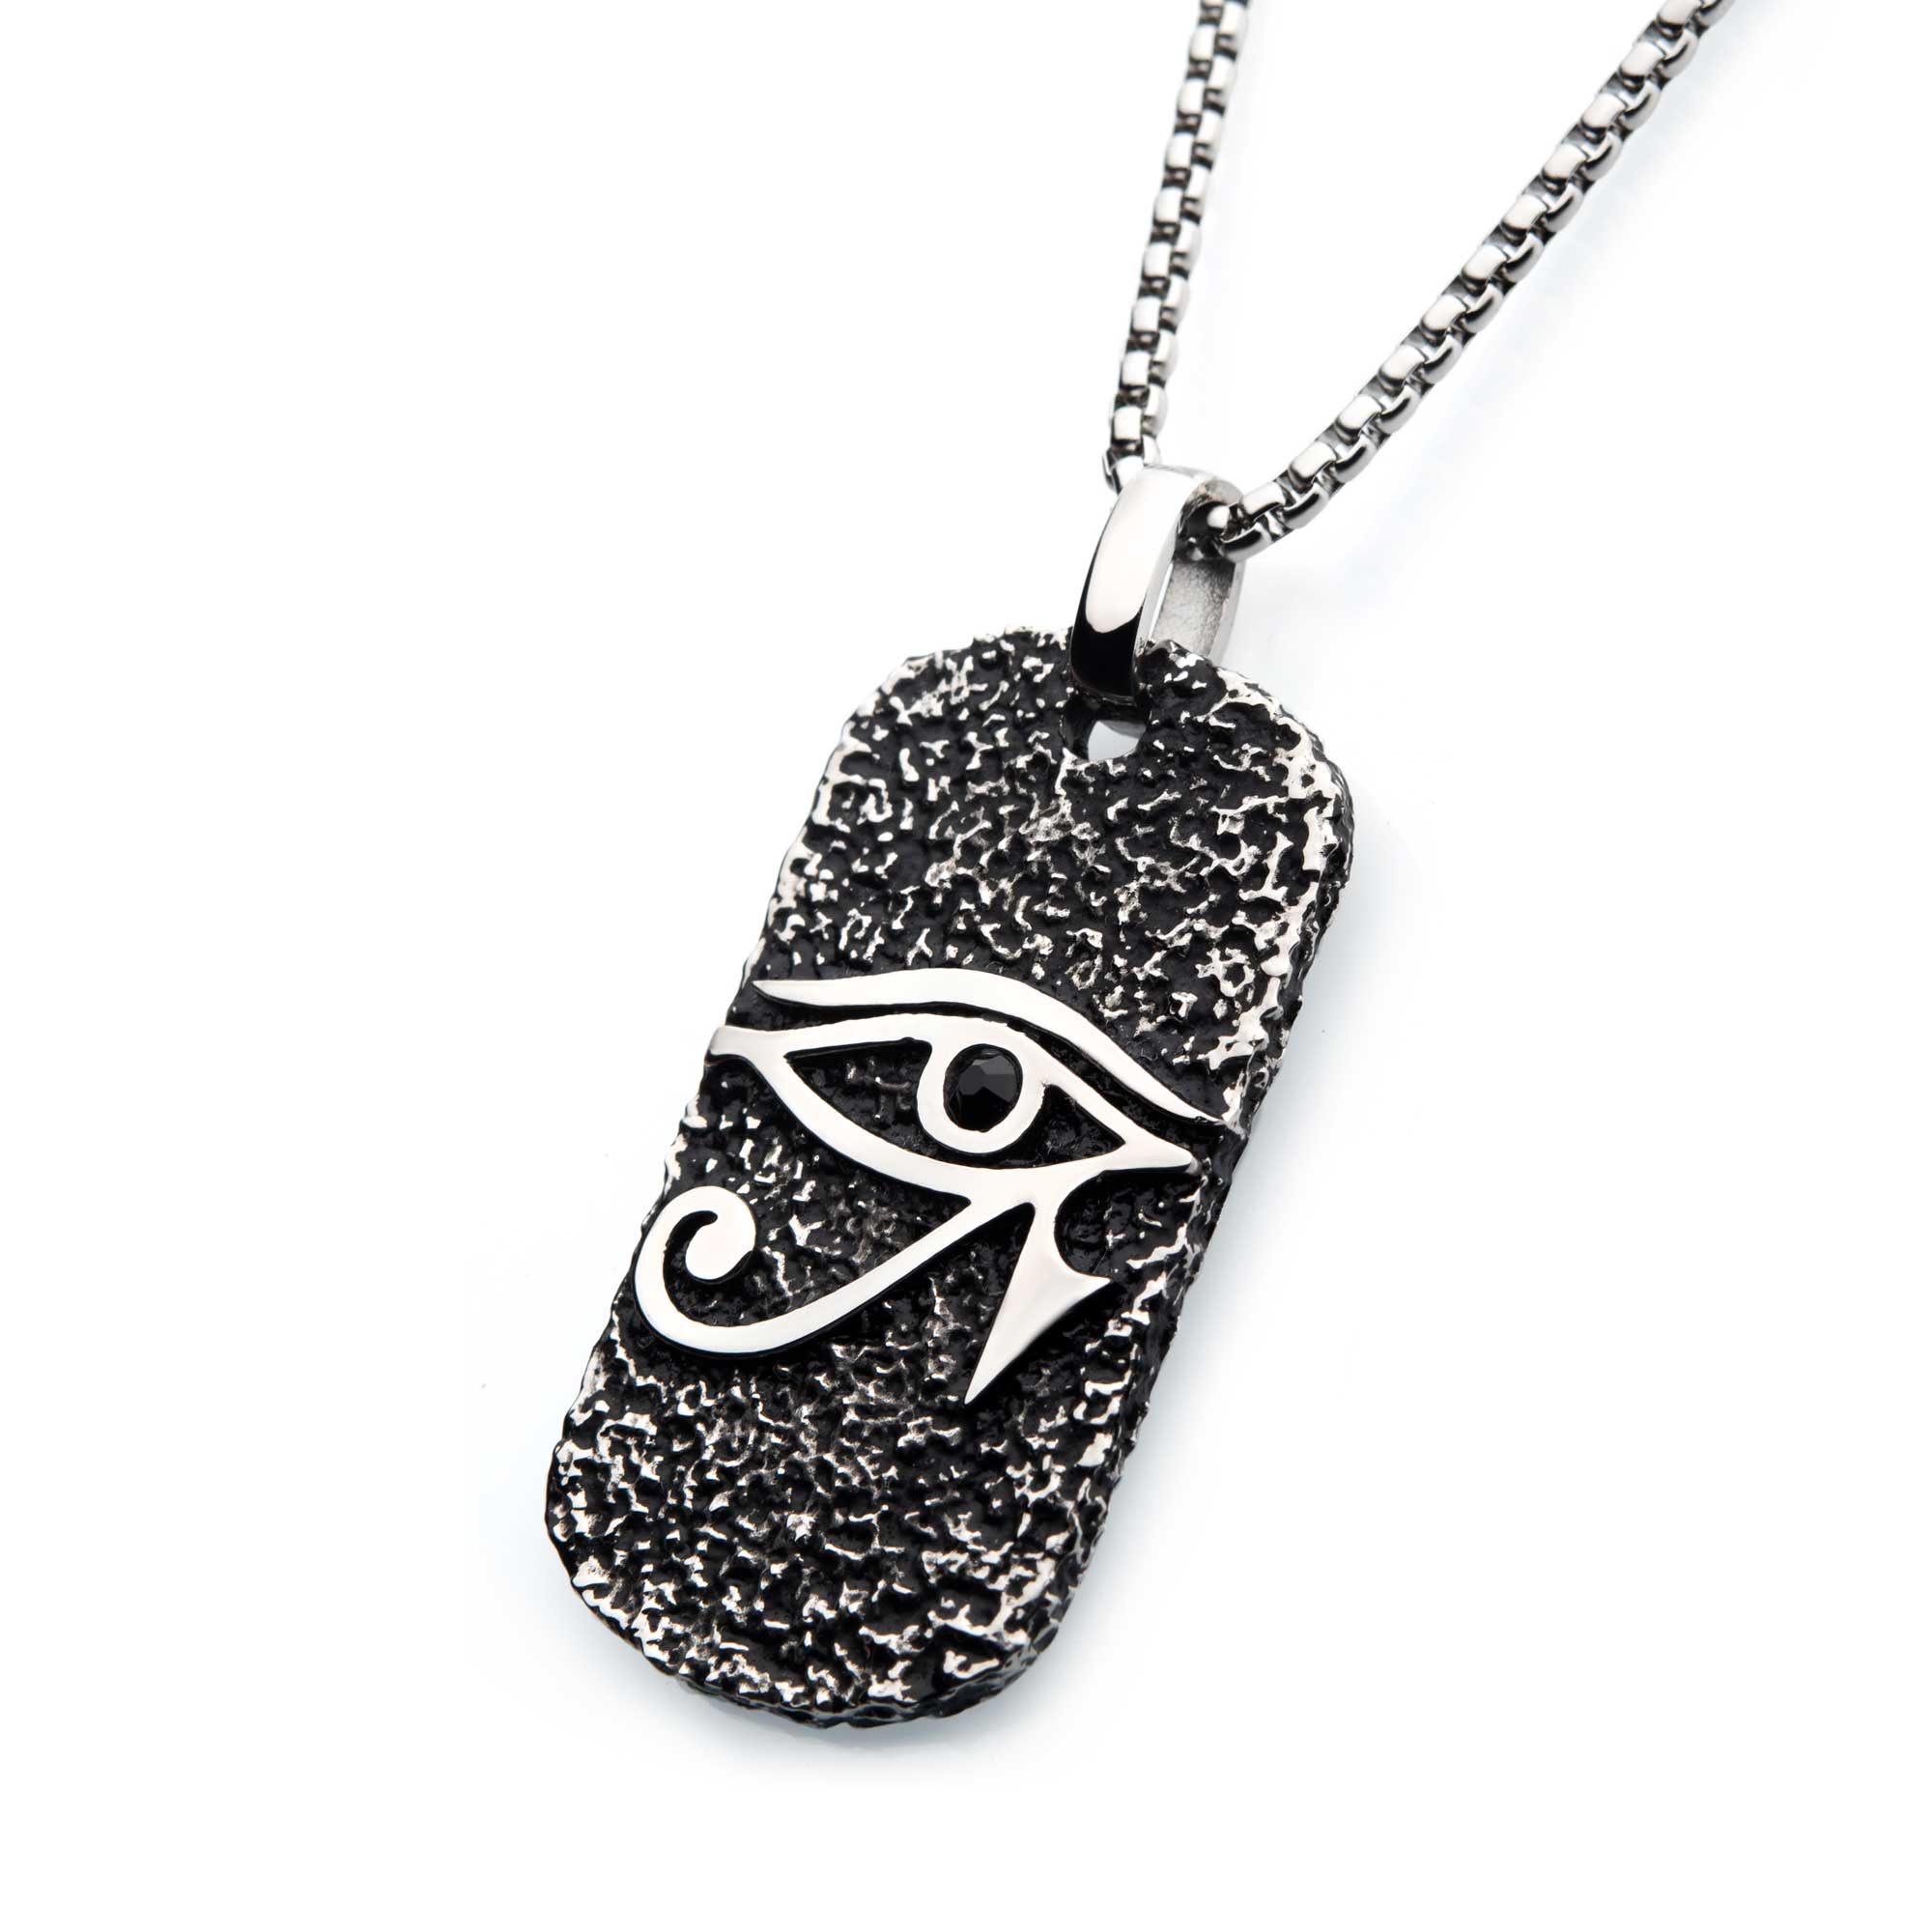 Black Oxidized Stainless Steel with Black CZ Eye of Horus Dog Tag Pendant, with Steel Box Chain Image 2 Ken Walker Jewelers Gig Harbor, WA